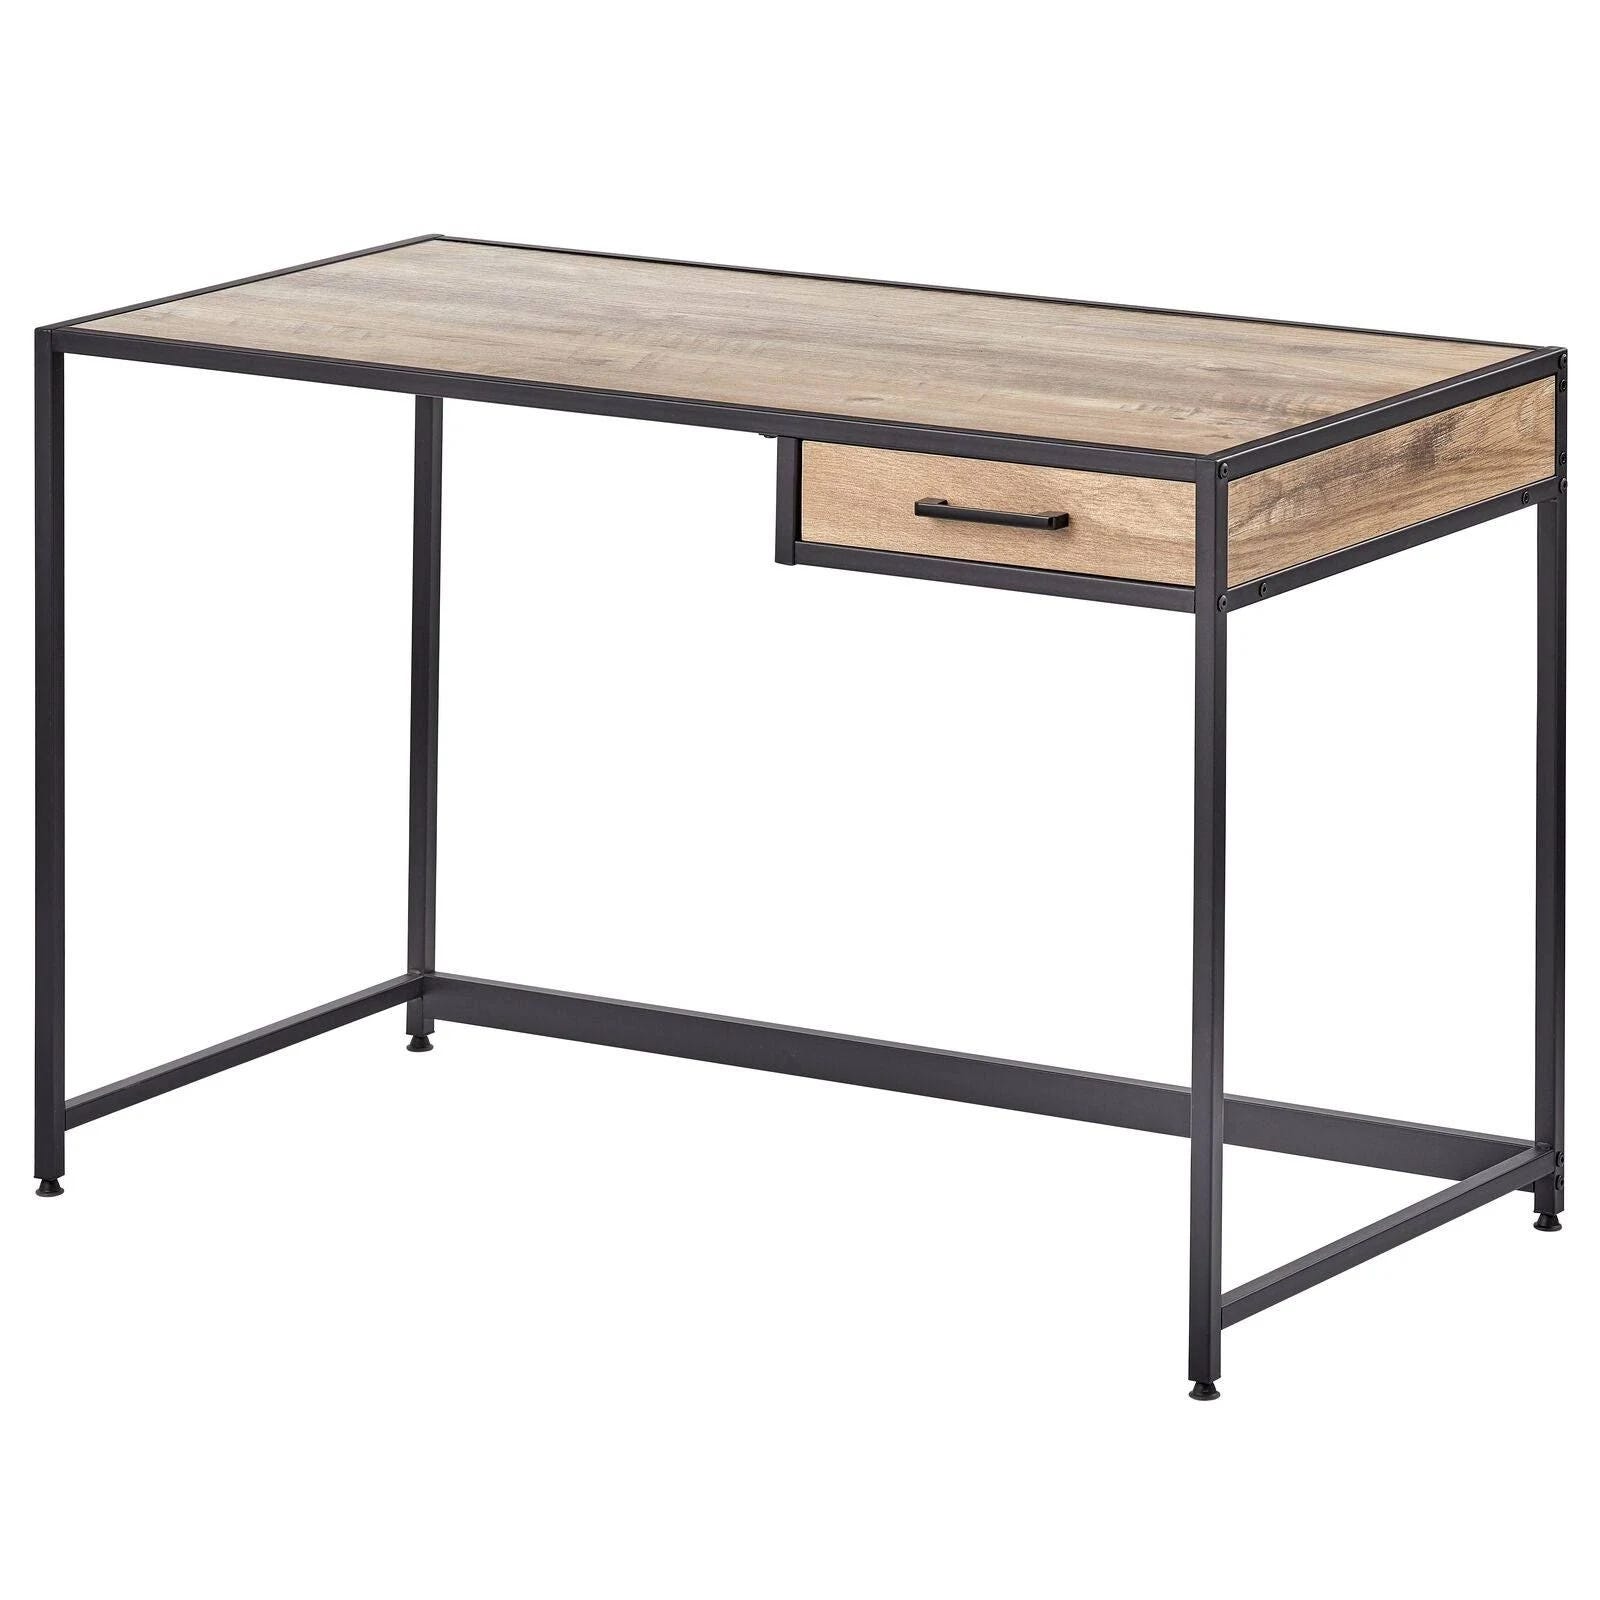 Stylish Metal & Wood Home Office Desk with Righthand Drawer | Image